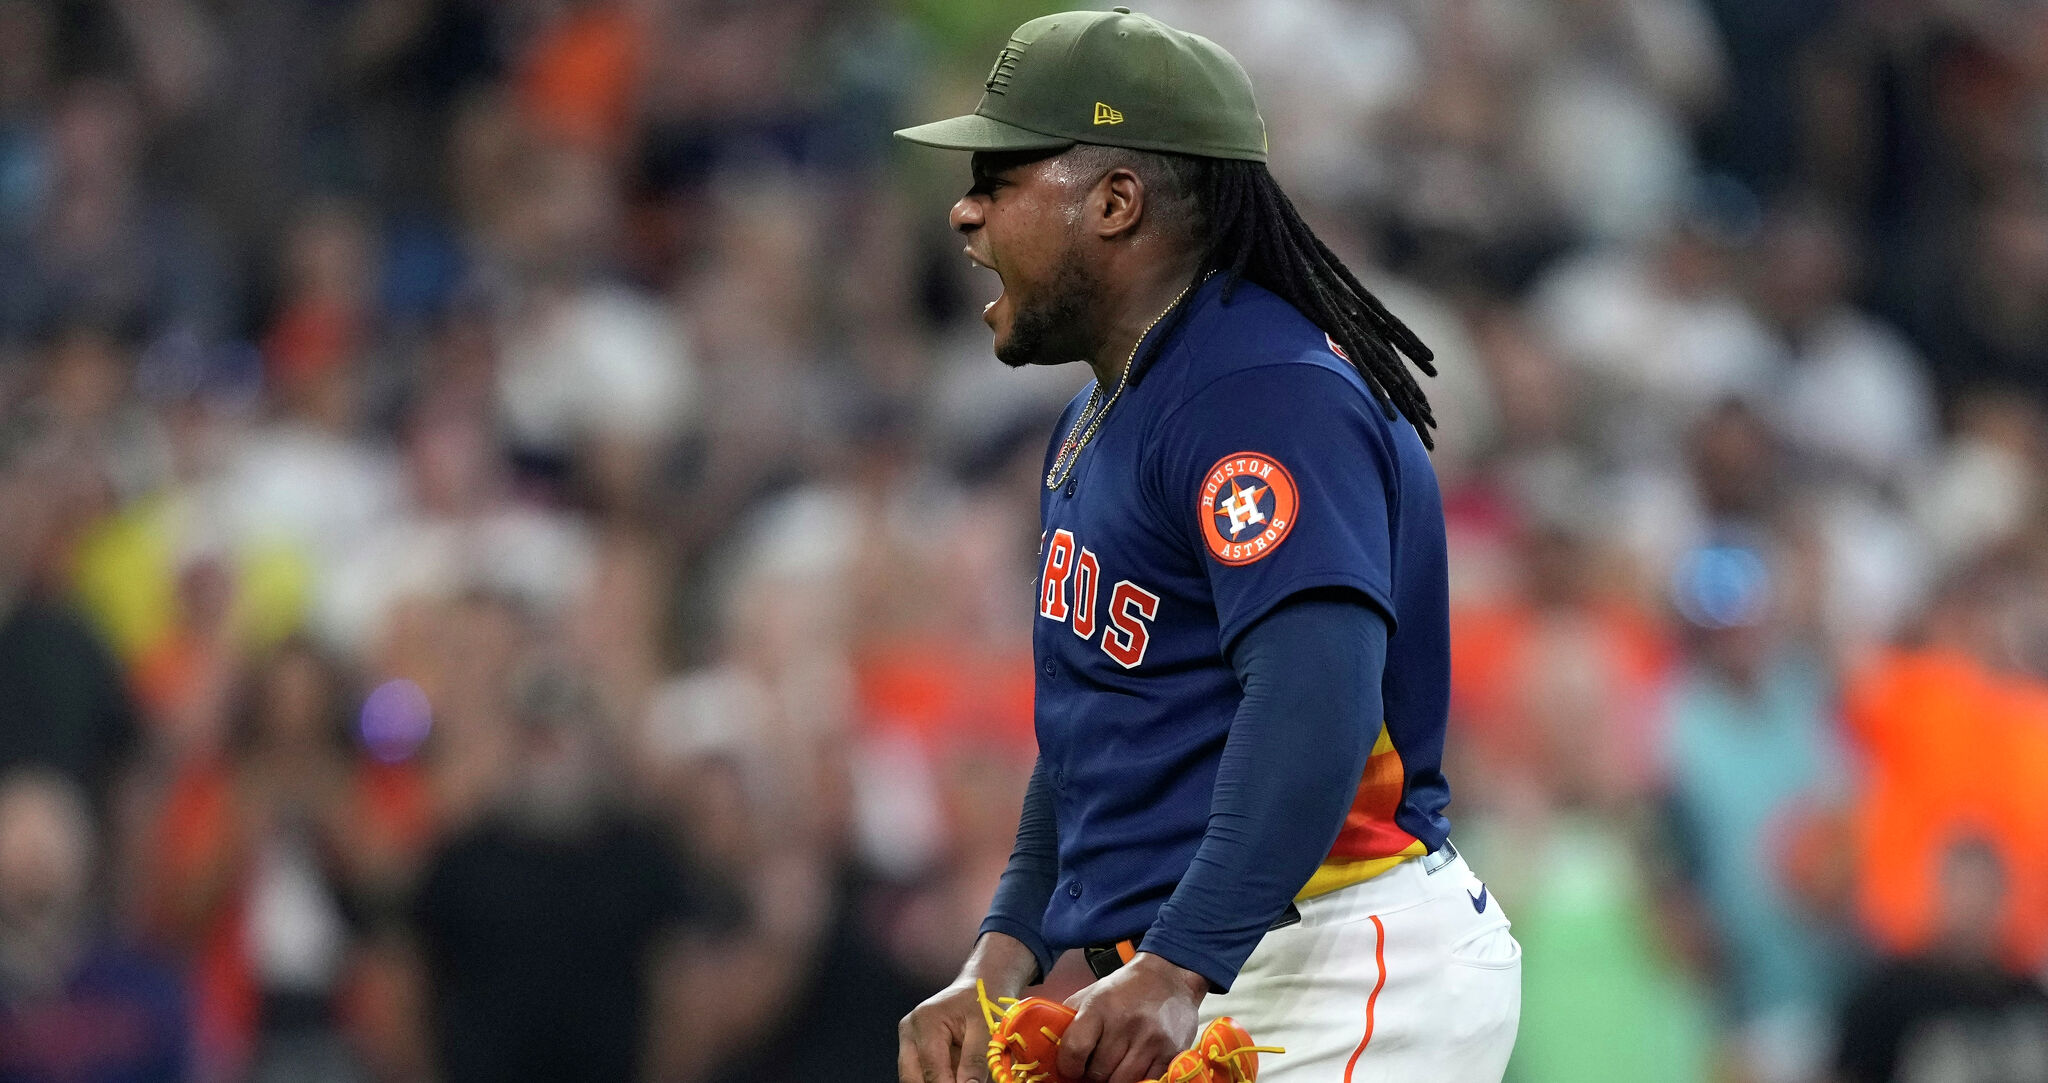 Houston Astros Orbit on X: People ask me all the time what they